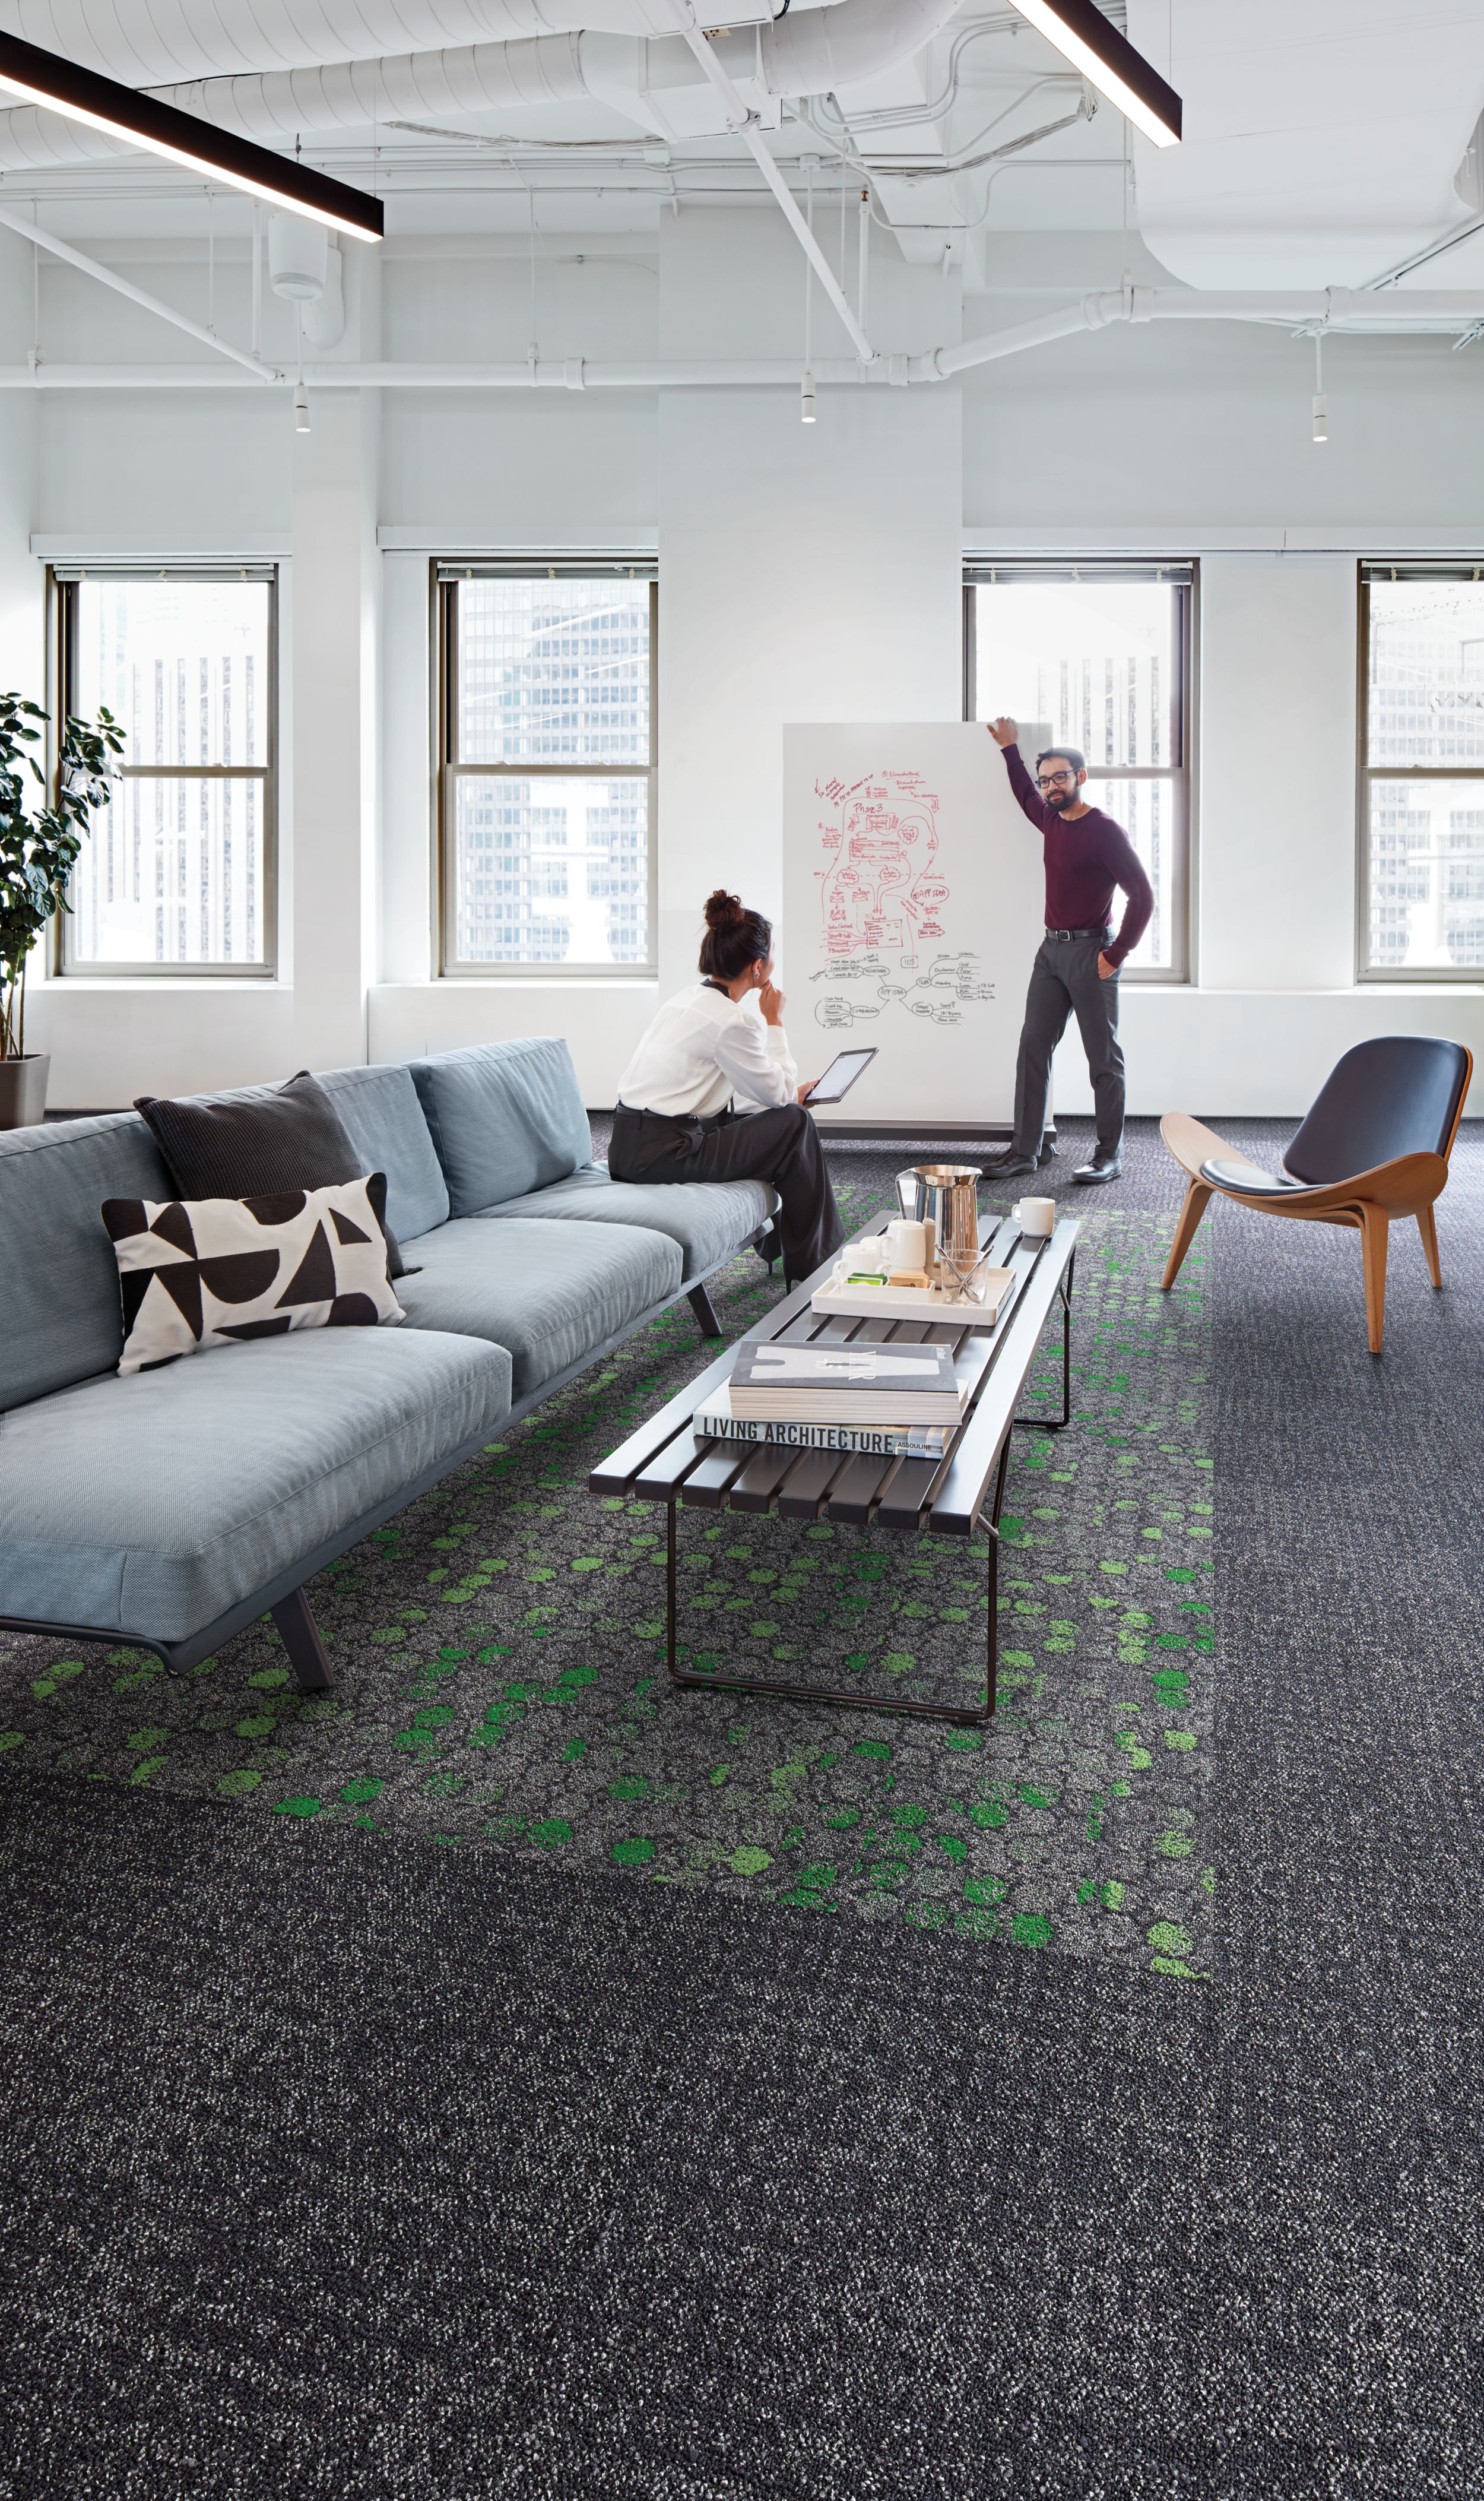 Interface Broome Street and Wheler Street in open office area with people numéro d’image 9